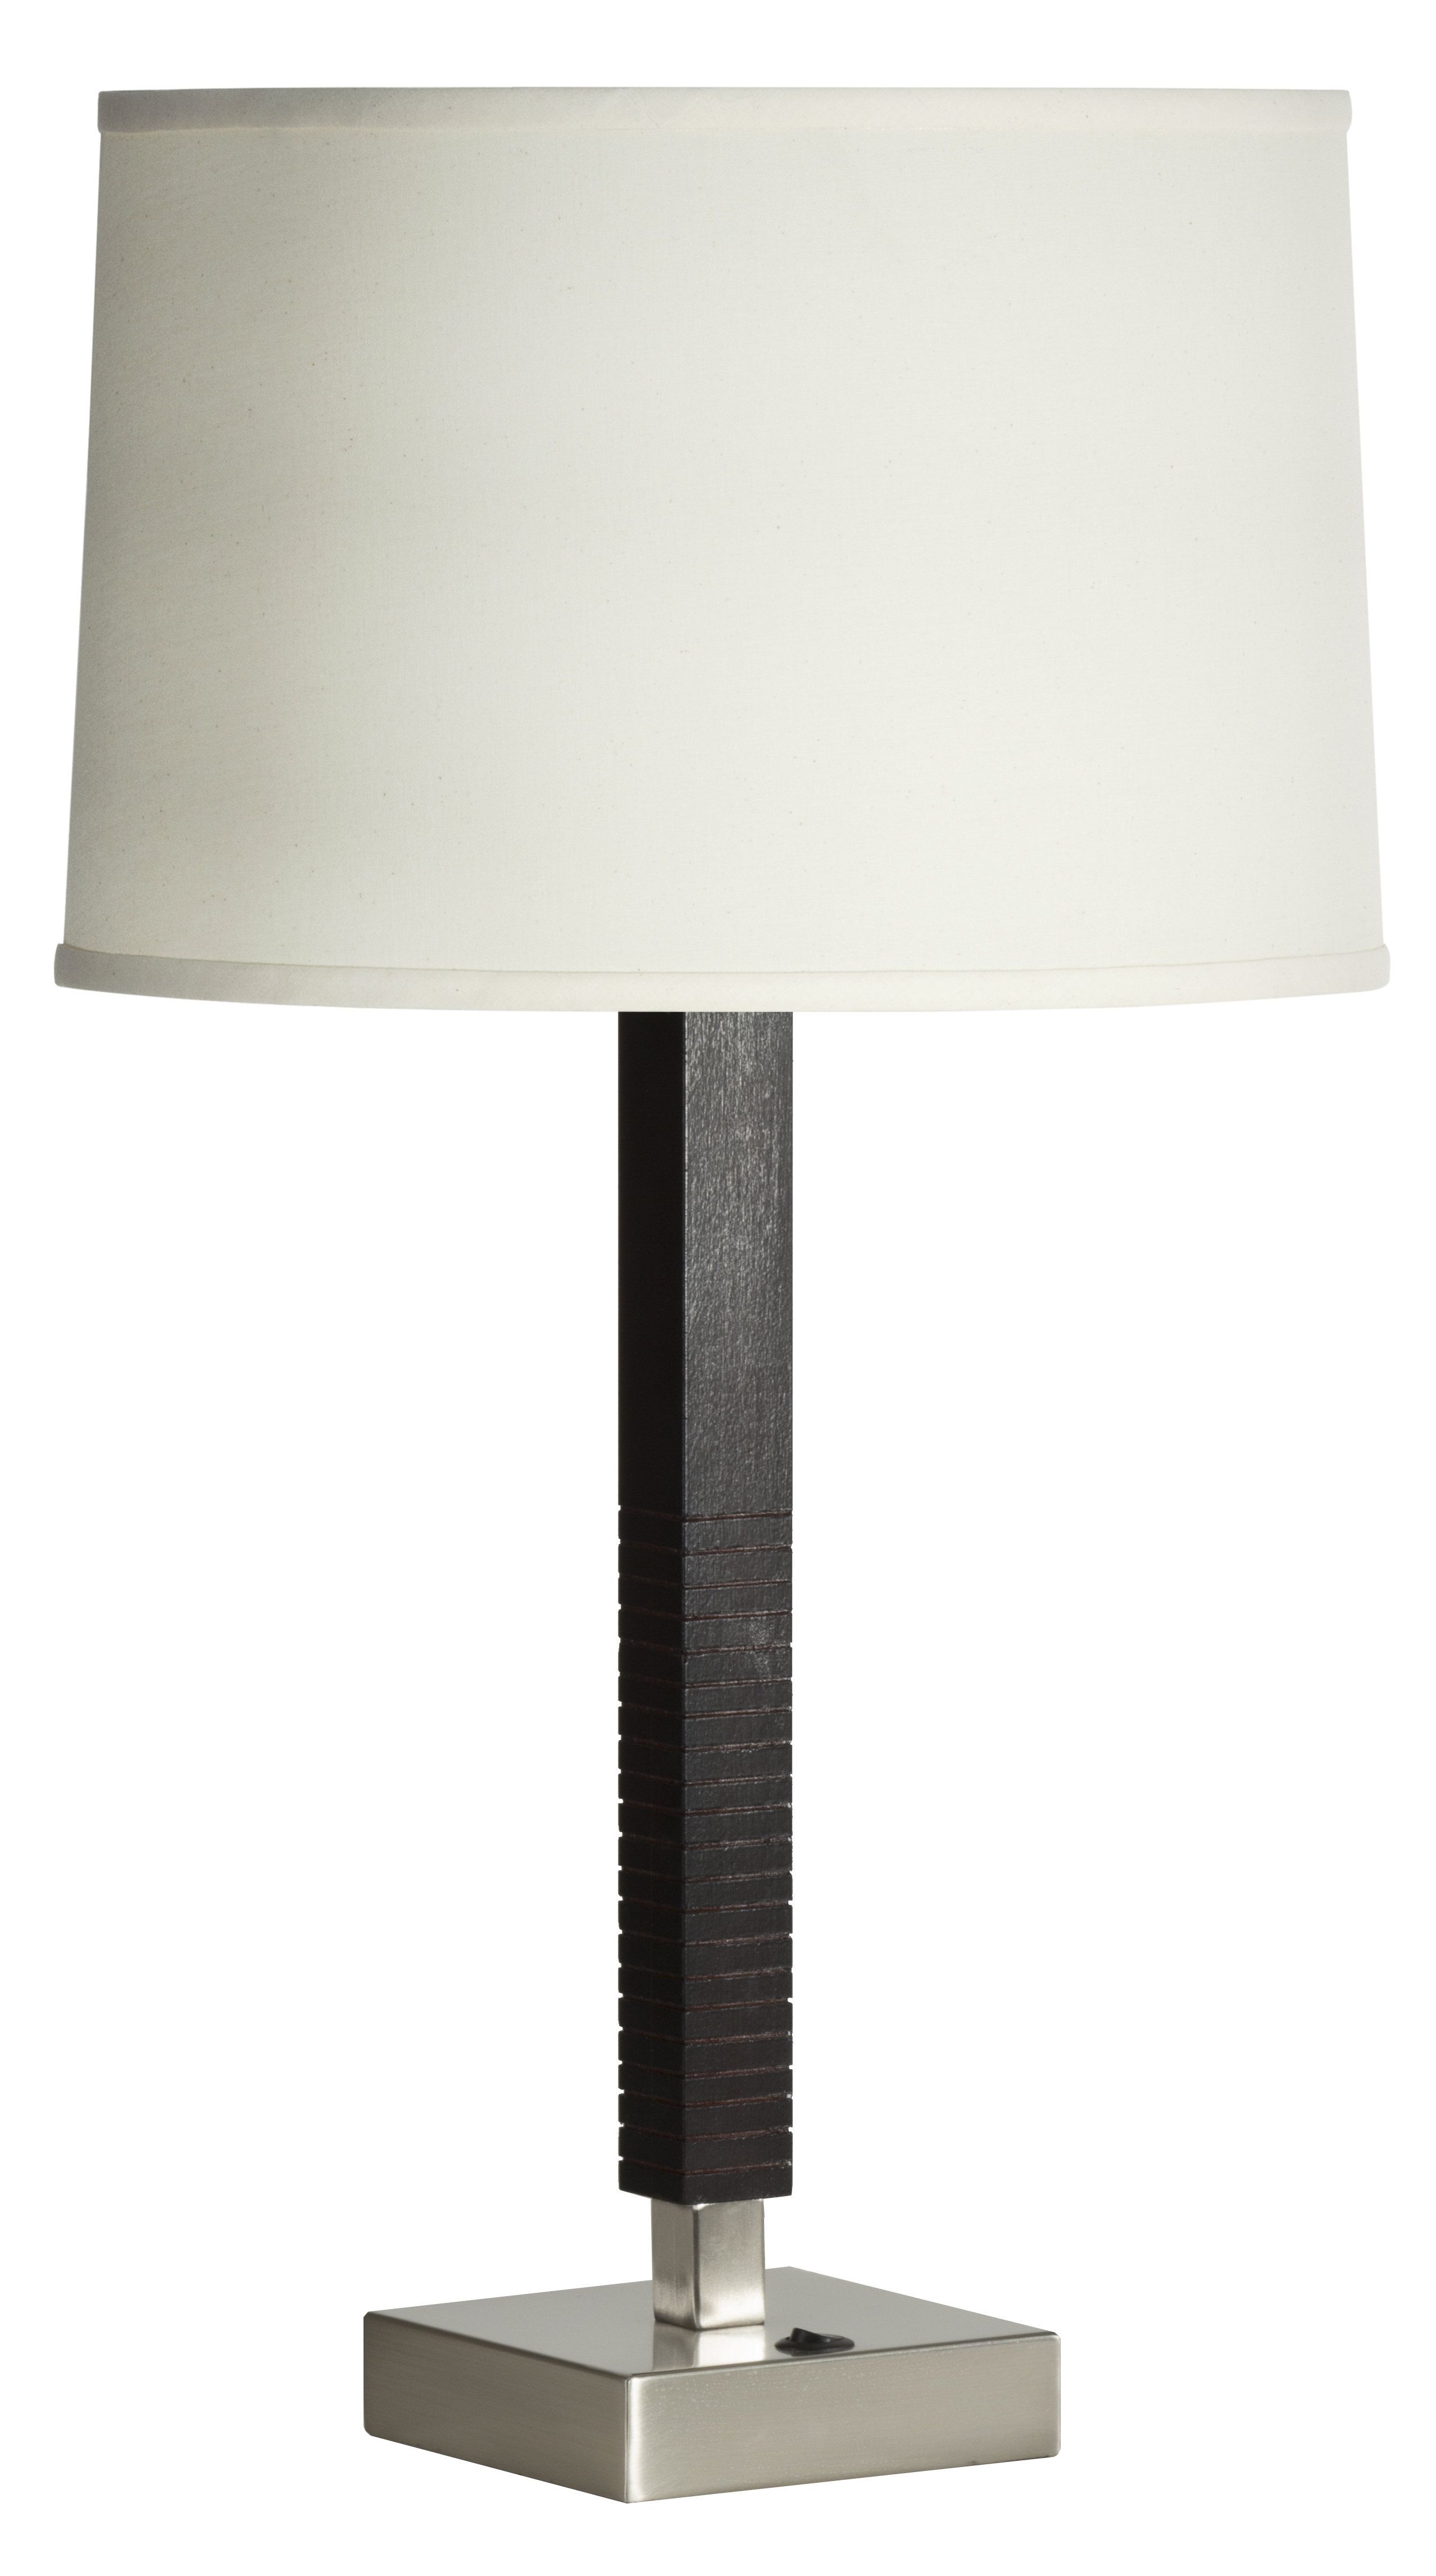 Orren Ellis Caskey 28" Table Lamp | Wayfair With Balboa Carved Console Tables (View 30 of 30)